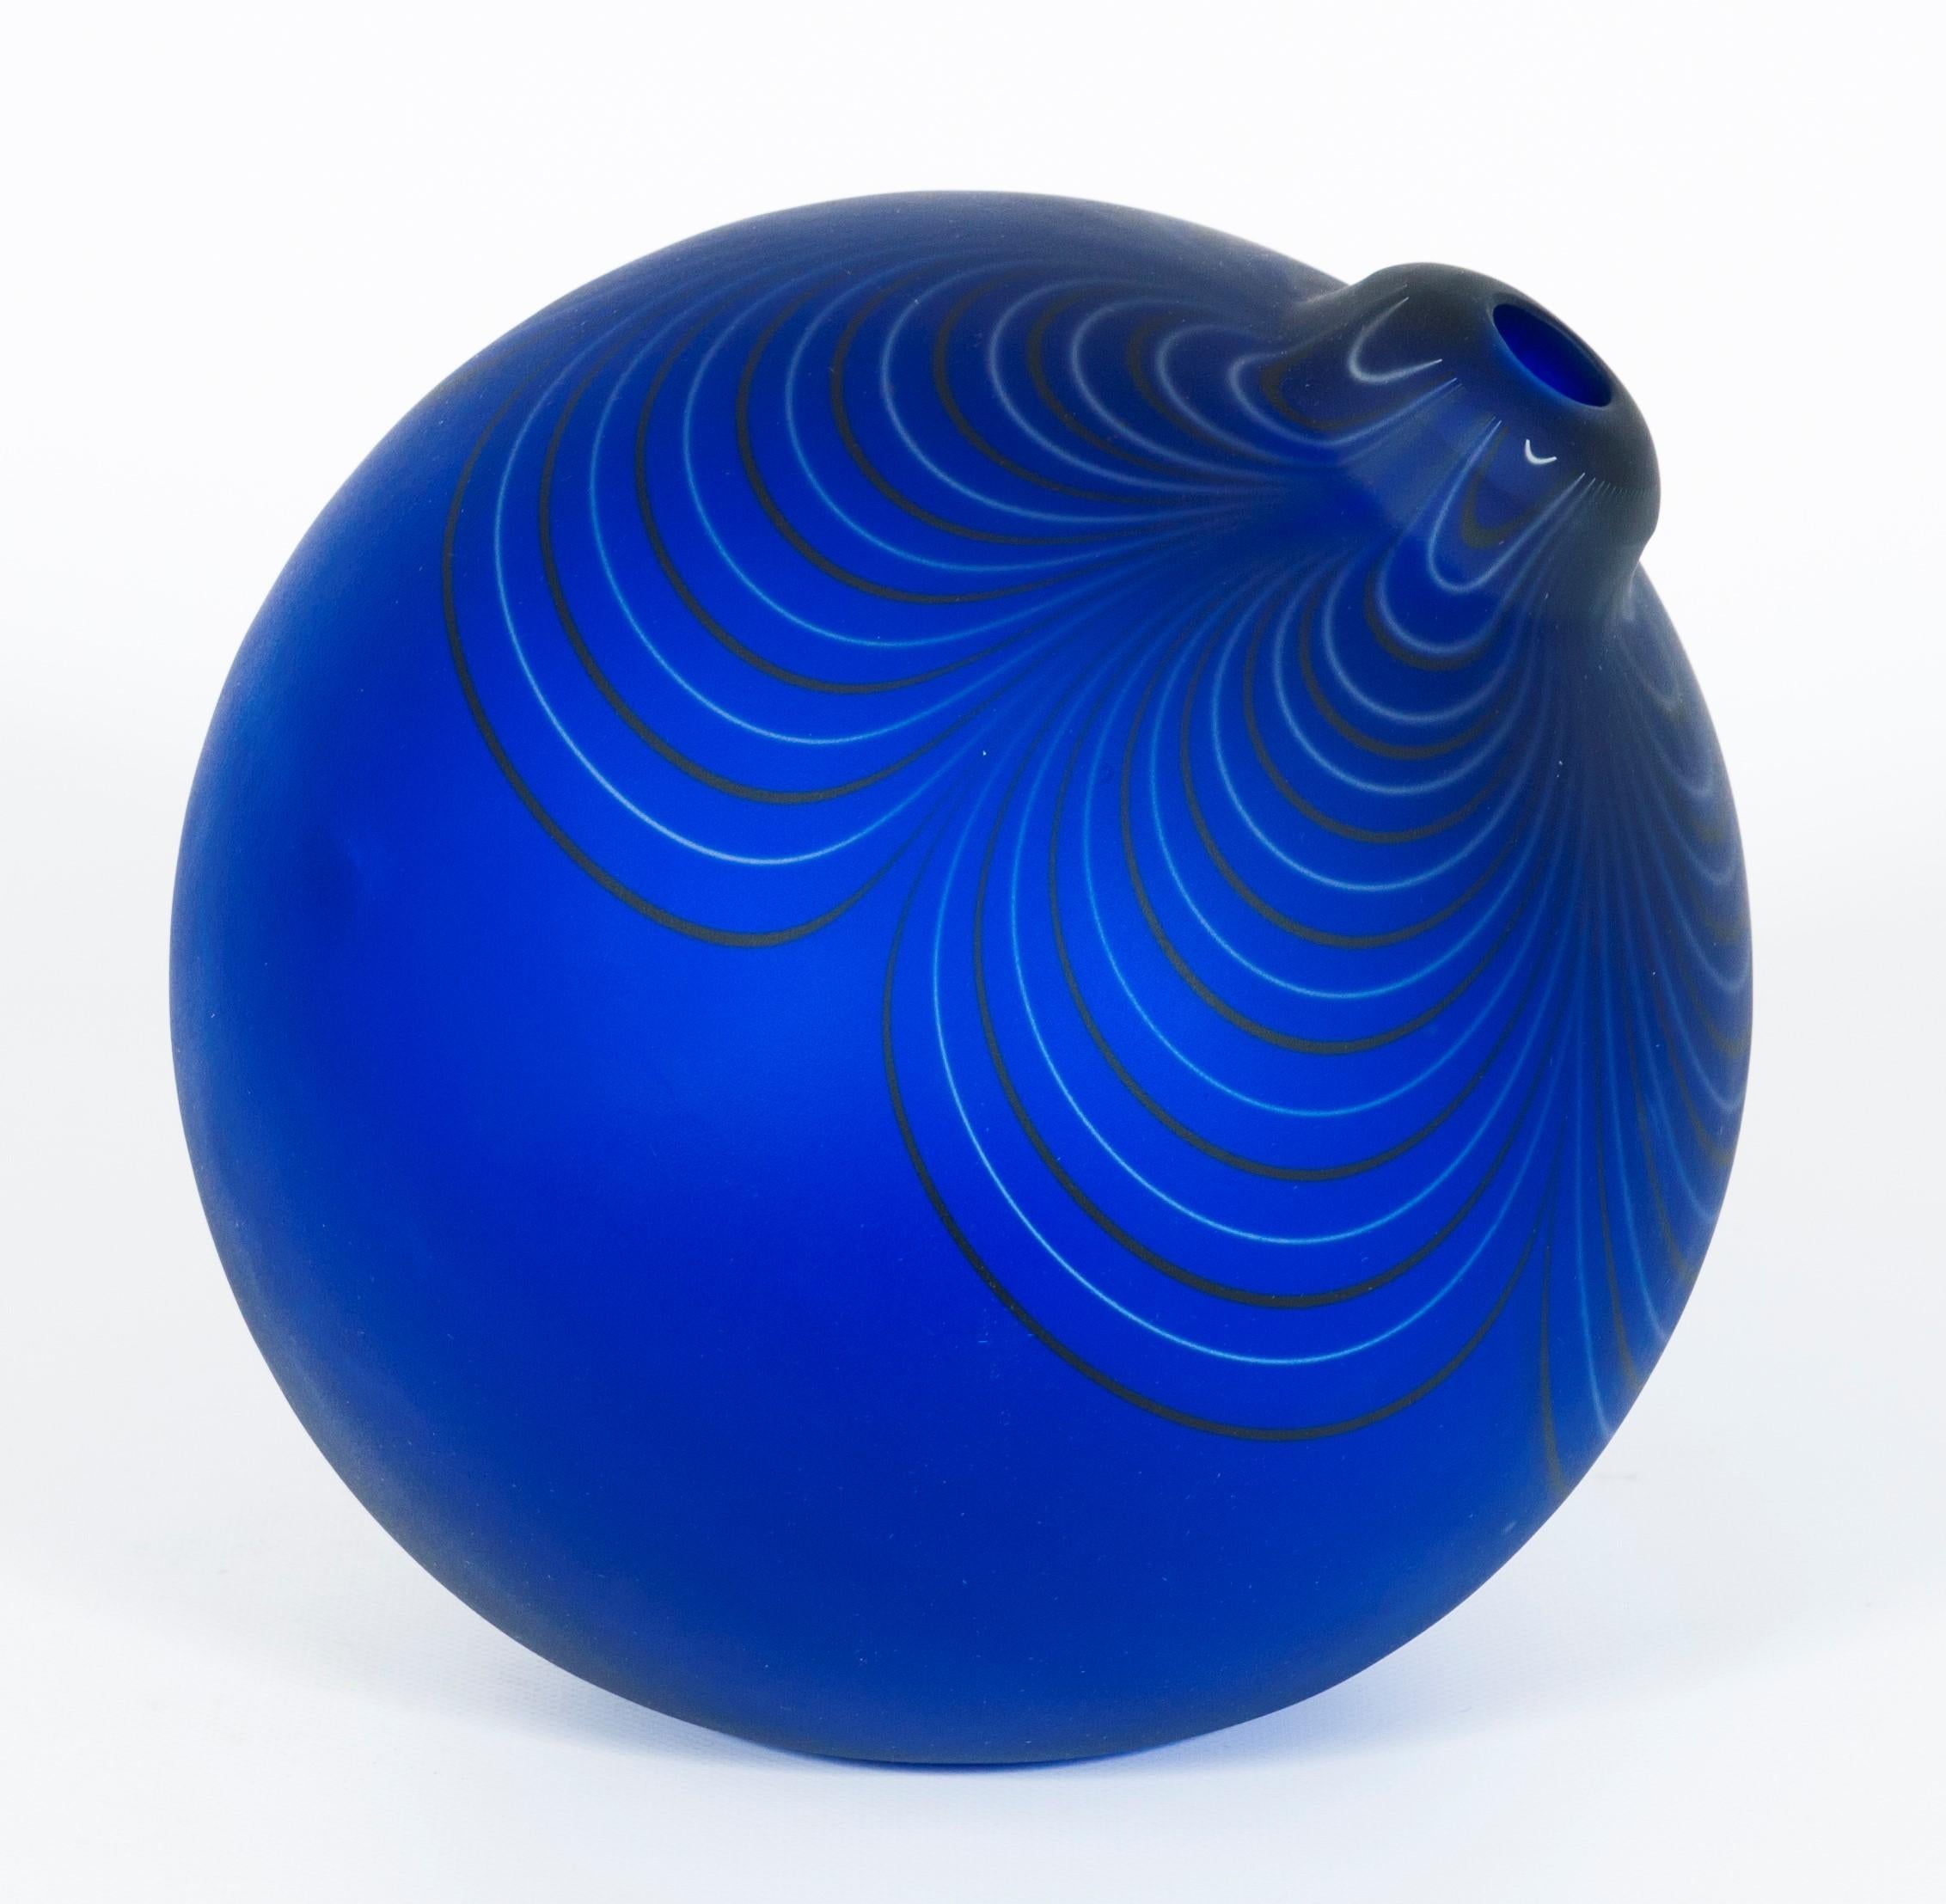 Design Murano Glass Blue Sphere by Alberto Donà, Italy, 1980s.
This unique artwork is simply outstanding. A vintage masterpiece by the renowned Italian artist Alberto Donà, entirely handmade in the island of Murano in the 1980s with blown